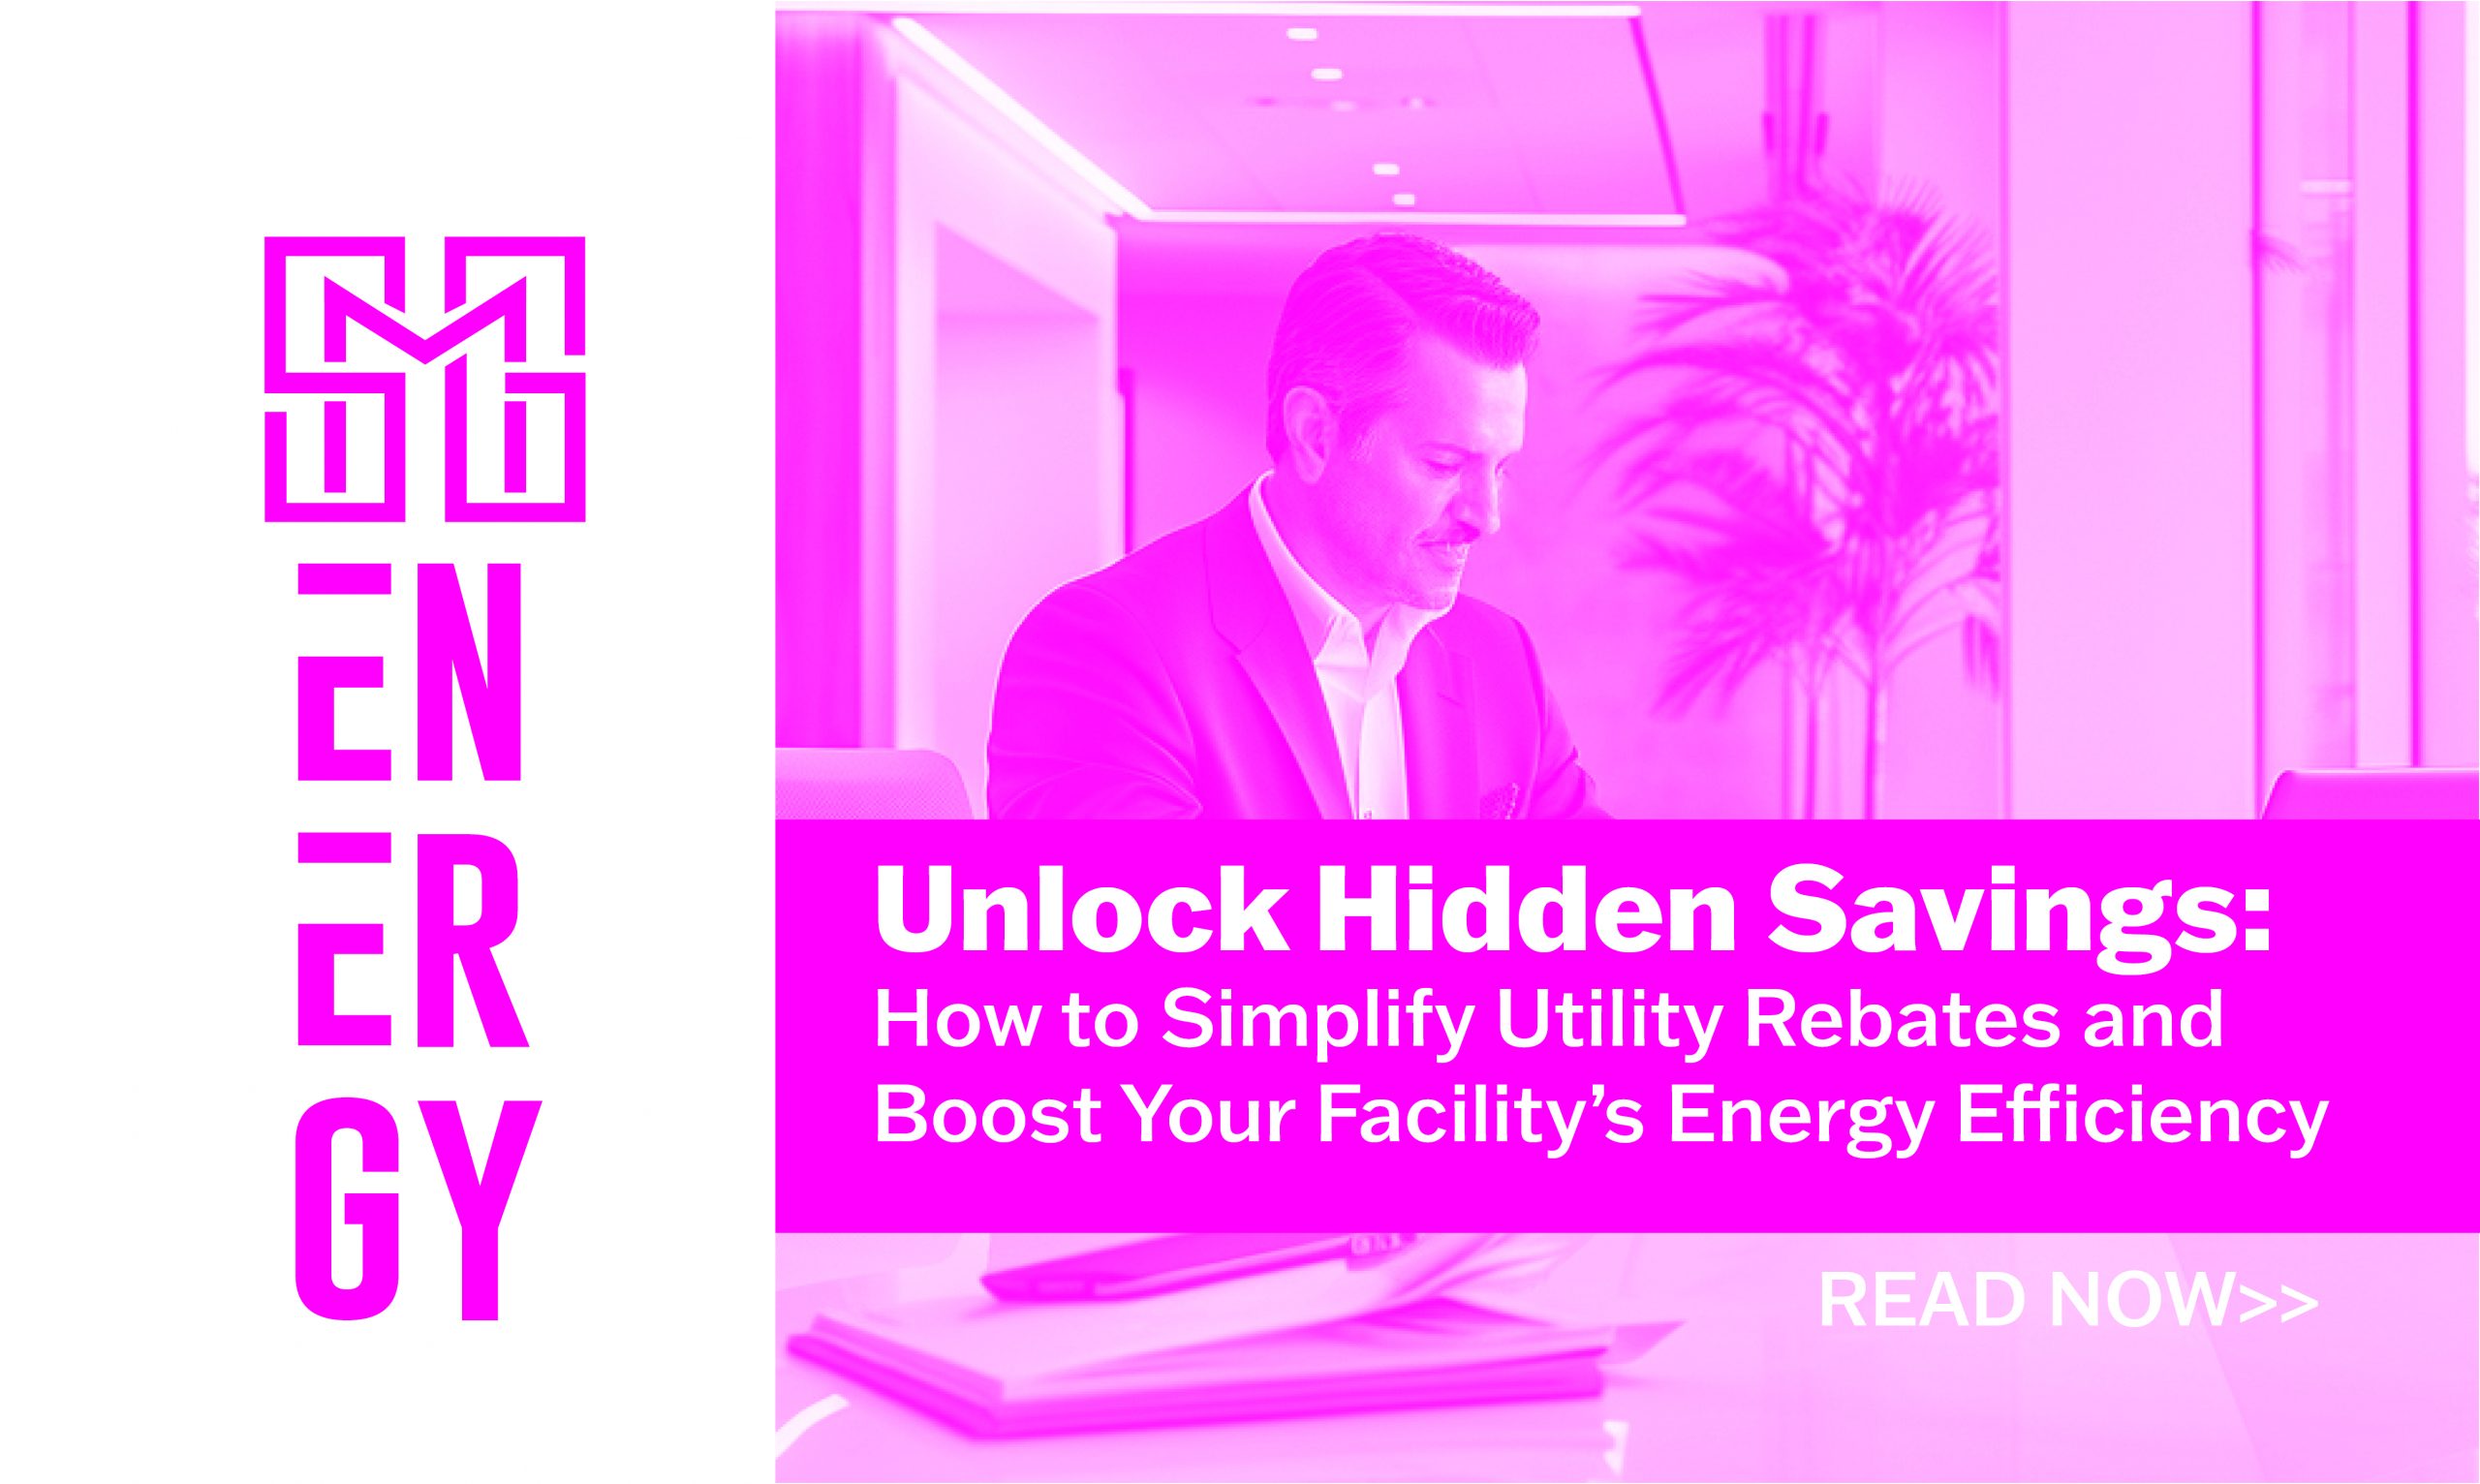 Unlock Hidden Savings: How to Simplify Utility Rebates and Boost Your Facility's Energy Efficiency